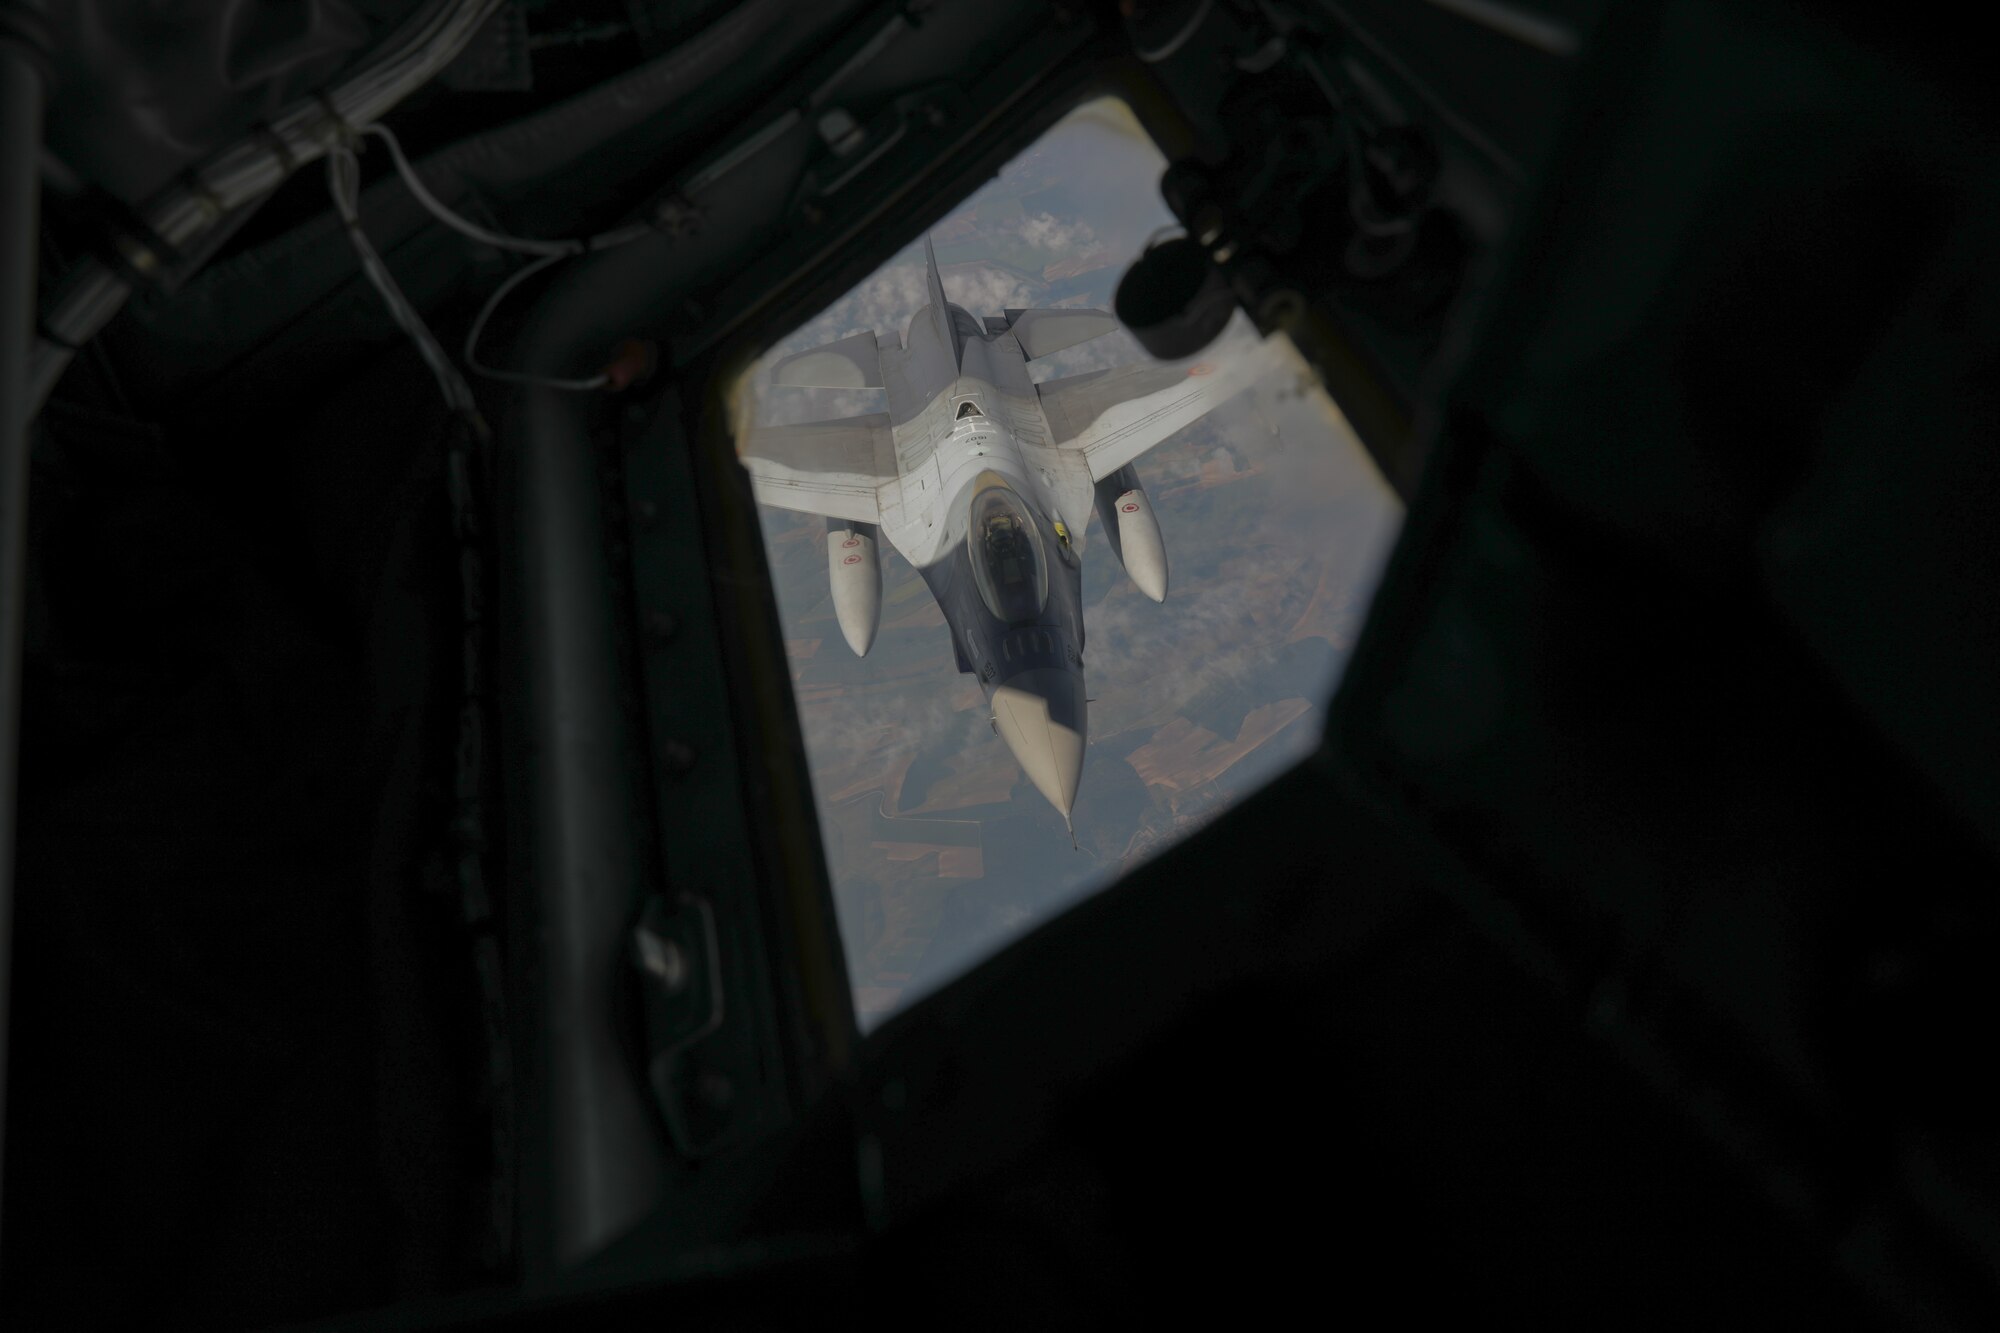 A Romanian F-16 prepares to be refueled in the air by a KC-135 from the Alabama Air National Guard 117th Air Refueling Wing in Bucharest, Romania. May 17, 2022. This exercise was part of a joint training mission through the State Partnership Program between the Alabama National Guard and Romania.